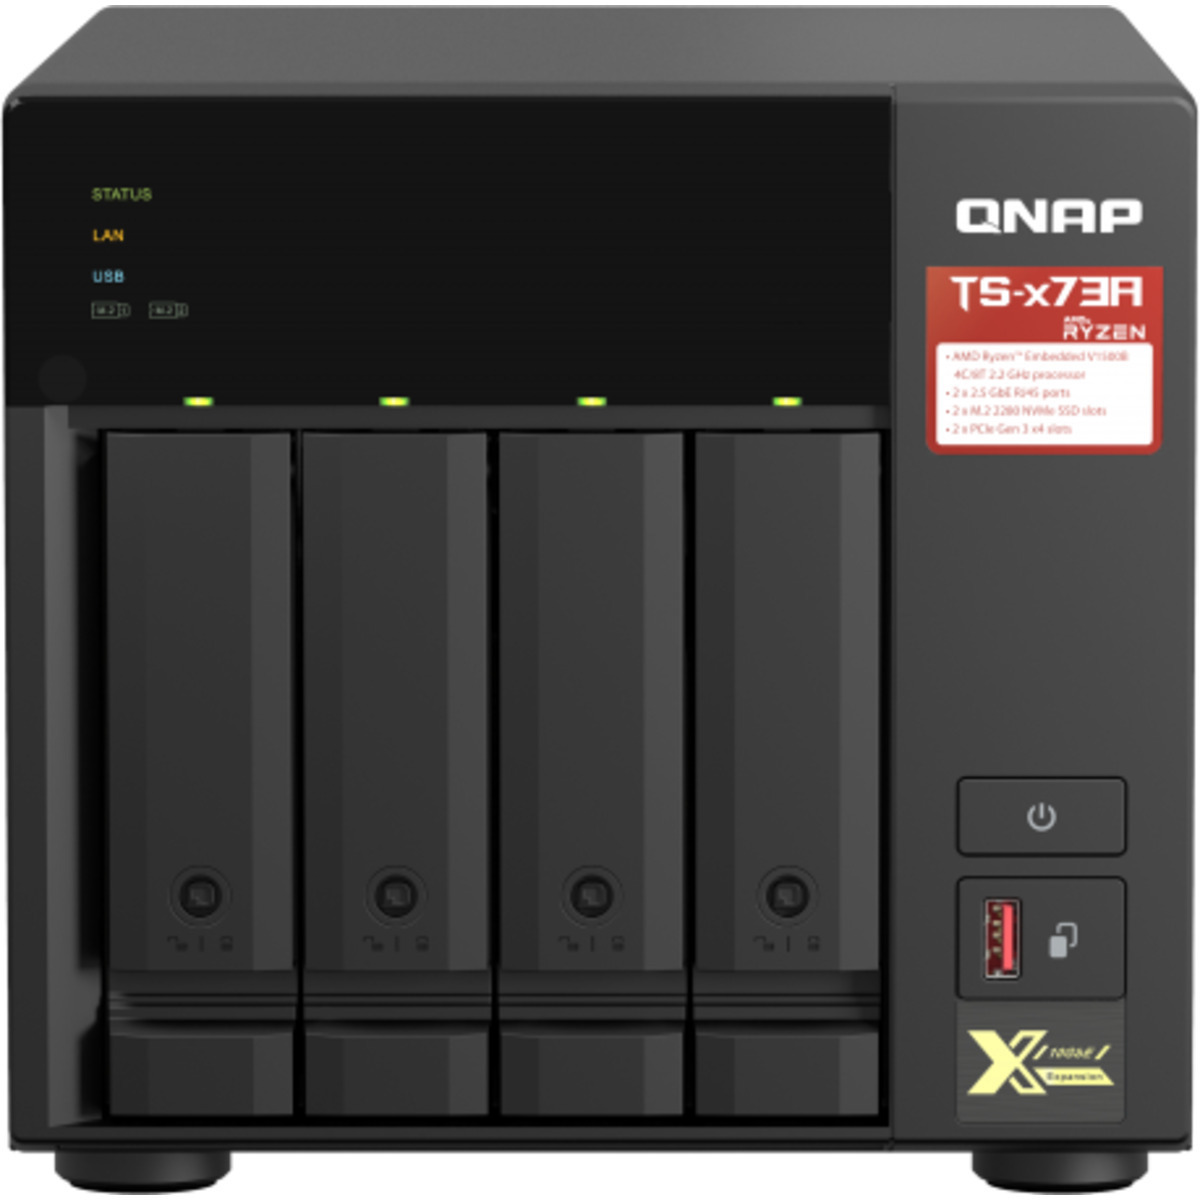 buy $2742 QNAP TS-473A 32tb Desktop NAS - Network Attached Storage Device 4x8000gb Samsung 870 QVO MZ-77Q8T0 2.5 560/530MB/s SATA 6Gb/s SSD CONSUMER Class Drives Installed - Burn-In Tested - ON SALE - nas headquarters buy network attached storage server device das new raid-5 free shipping simply usa TS-473A